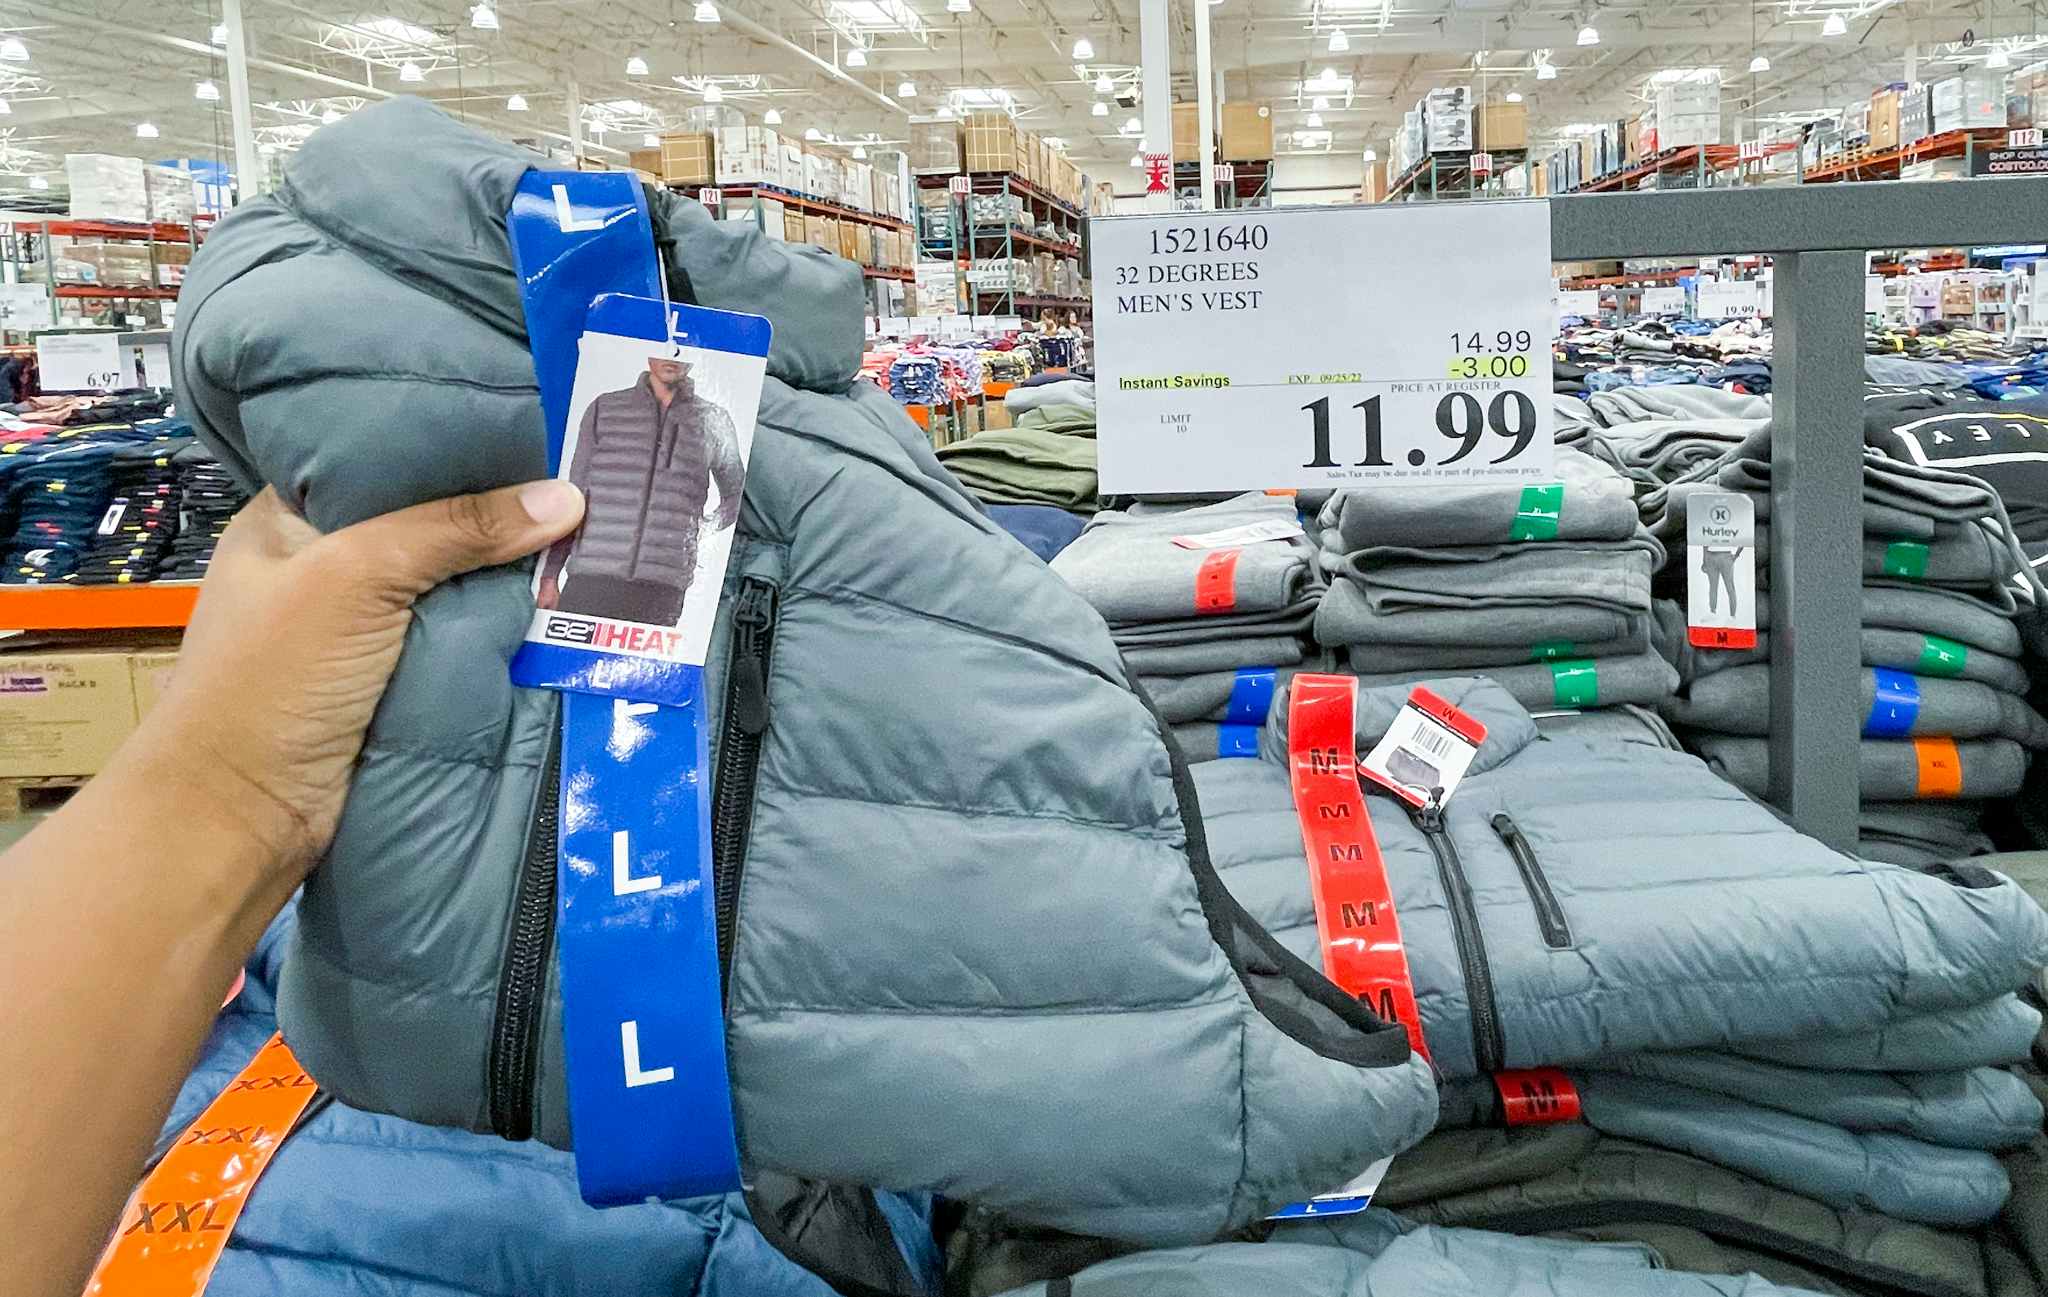 mens vest hand held near sale sign at costco